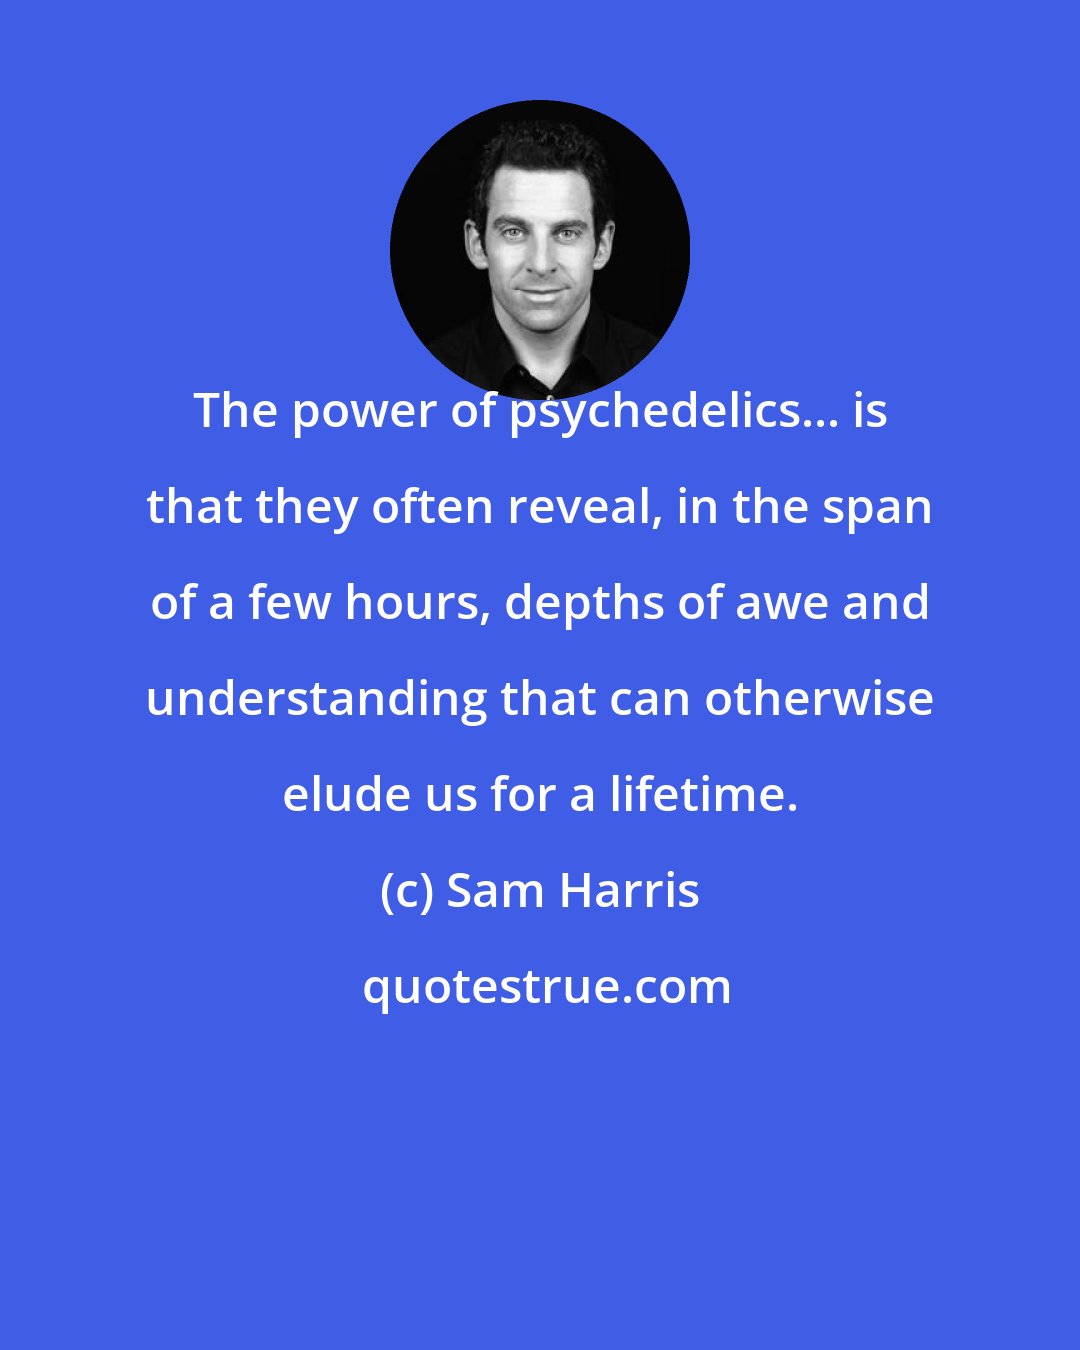 Sam Harris: The power of psychedelics... is that they often reveal, in the span of a few hours, depths of awe and understanding that can otherwise elude us for a lifetime.